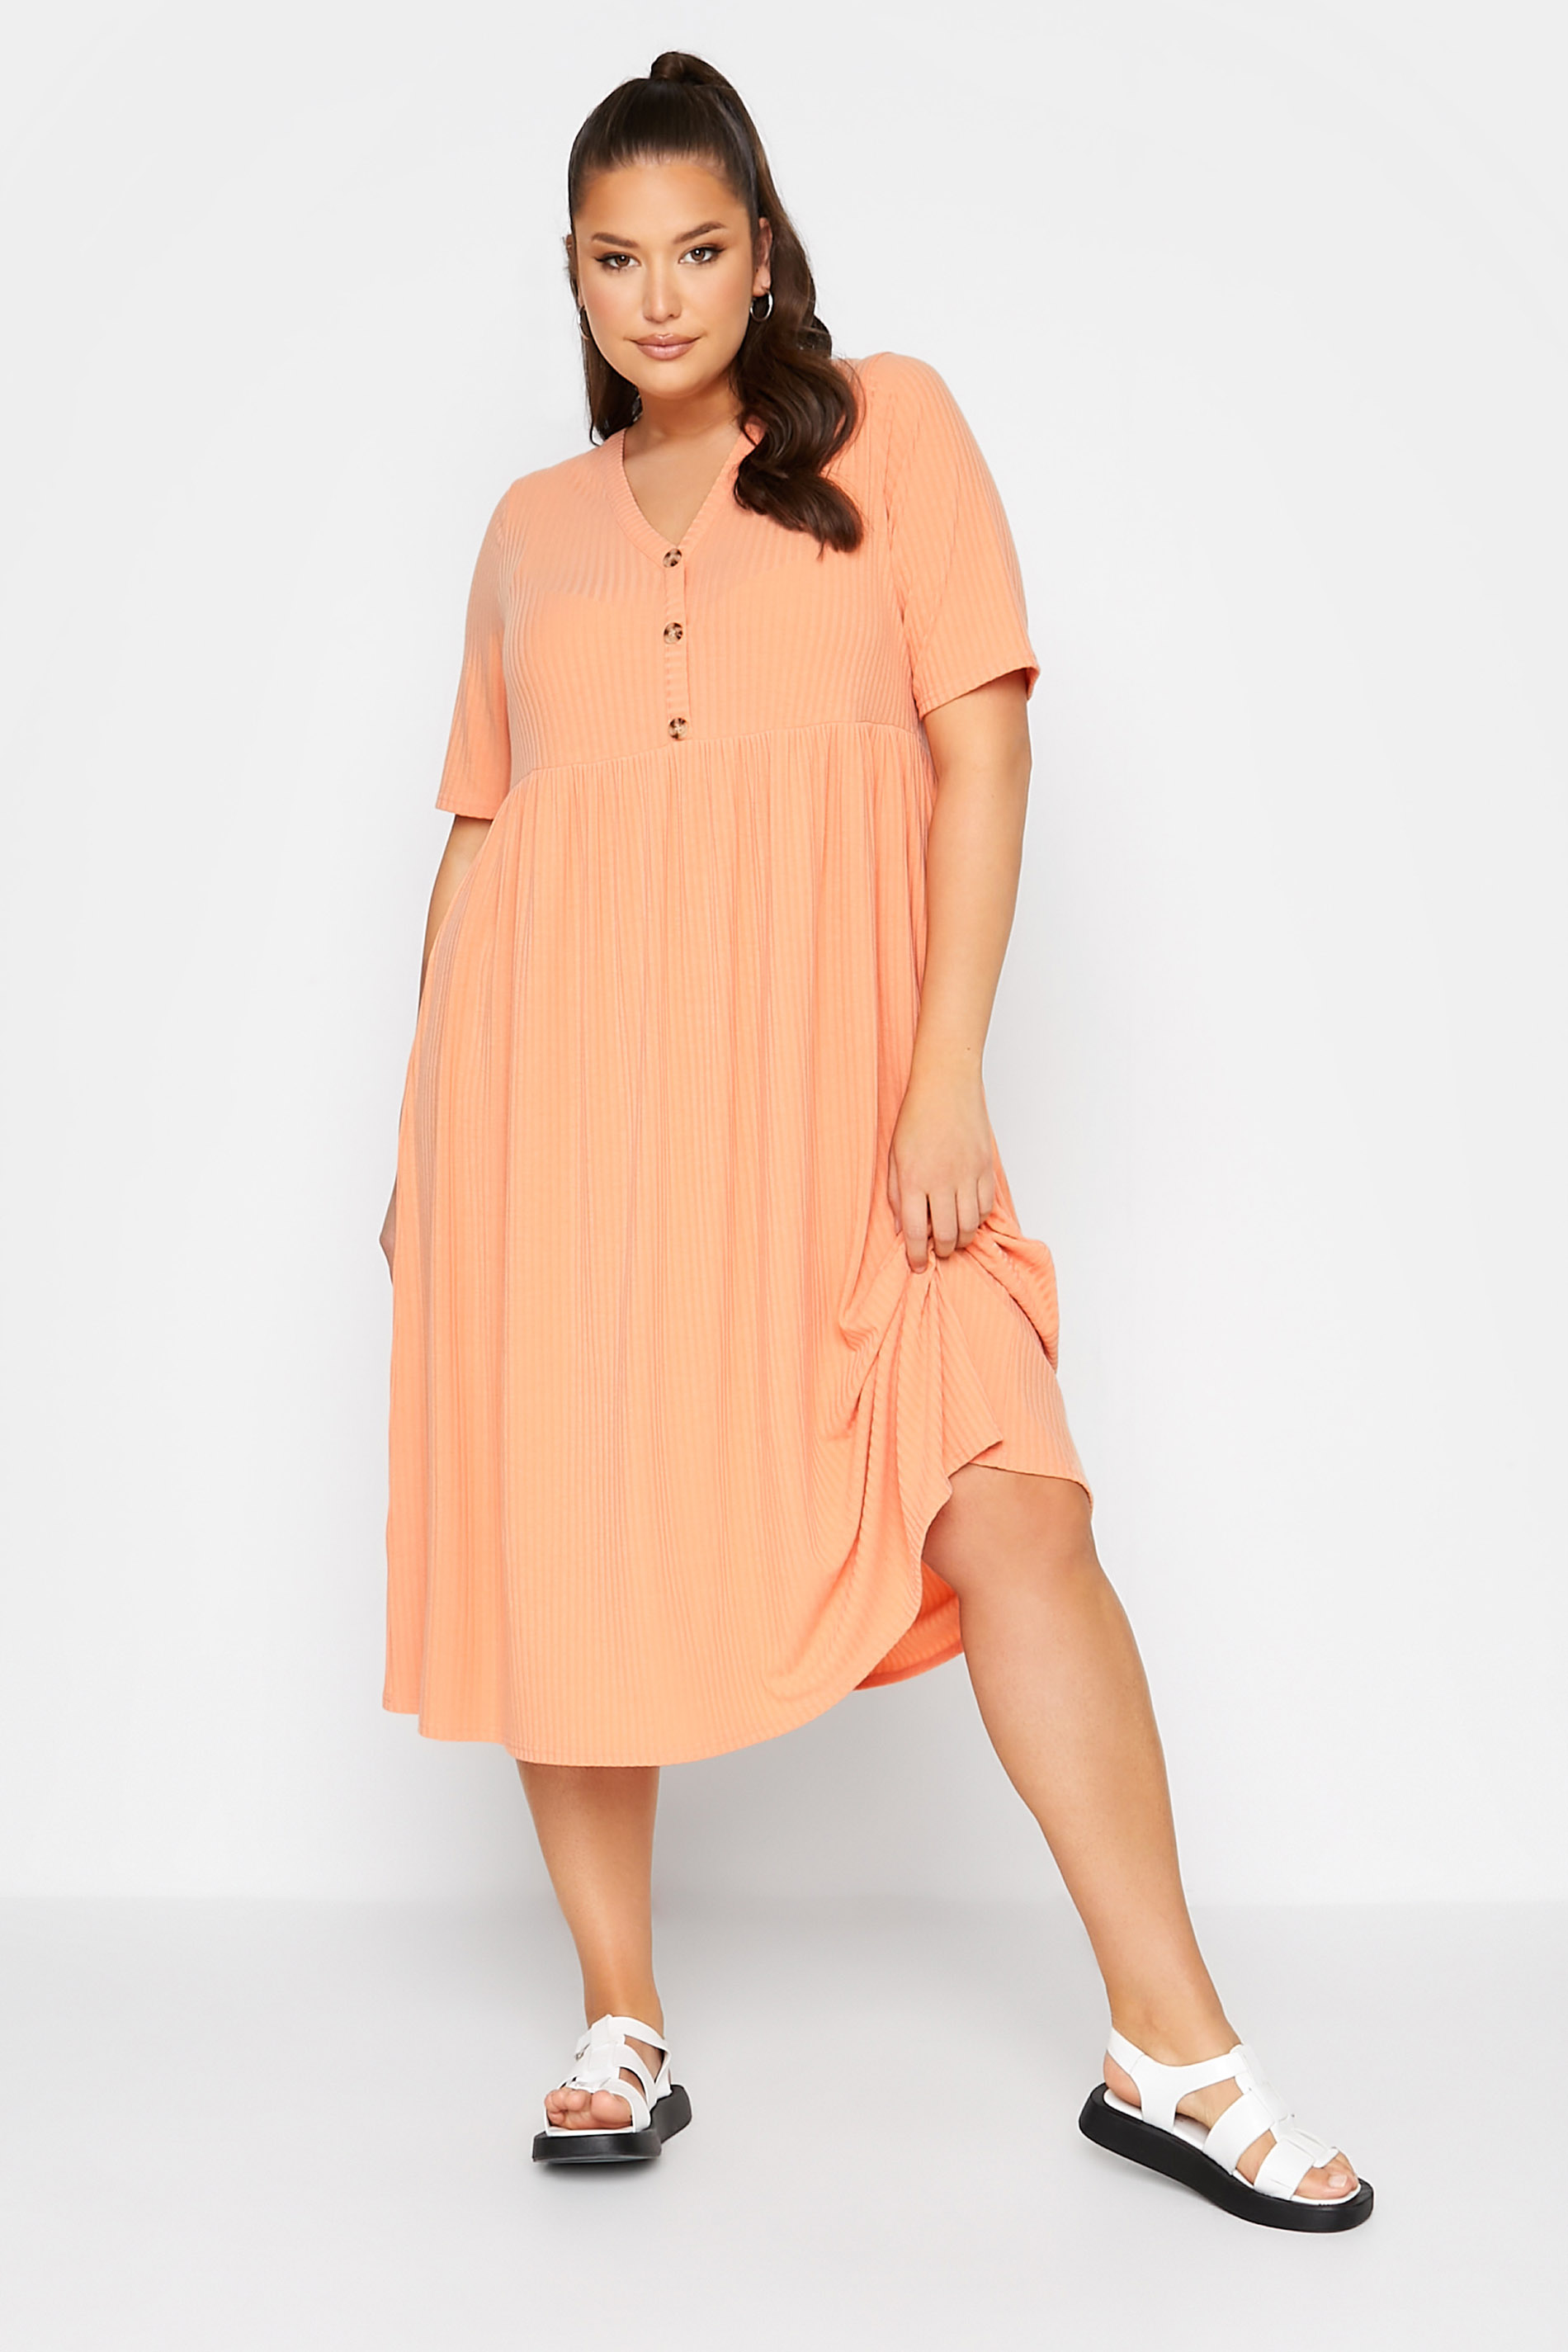 Robes Grande Taille Grande taille  Robes Mi-Longue | LIMITED COLLECTION - Robe Midi Orange Nervuré Peplum - EE59861